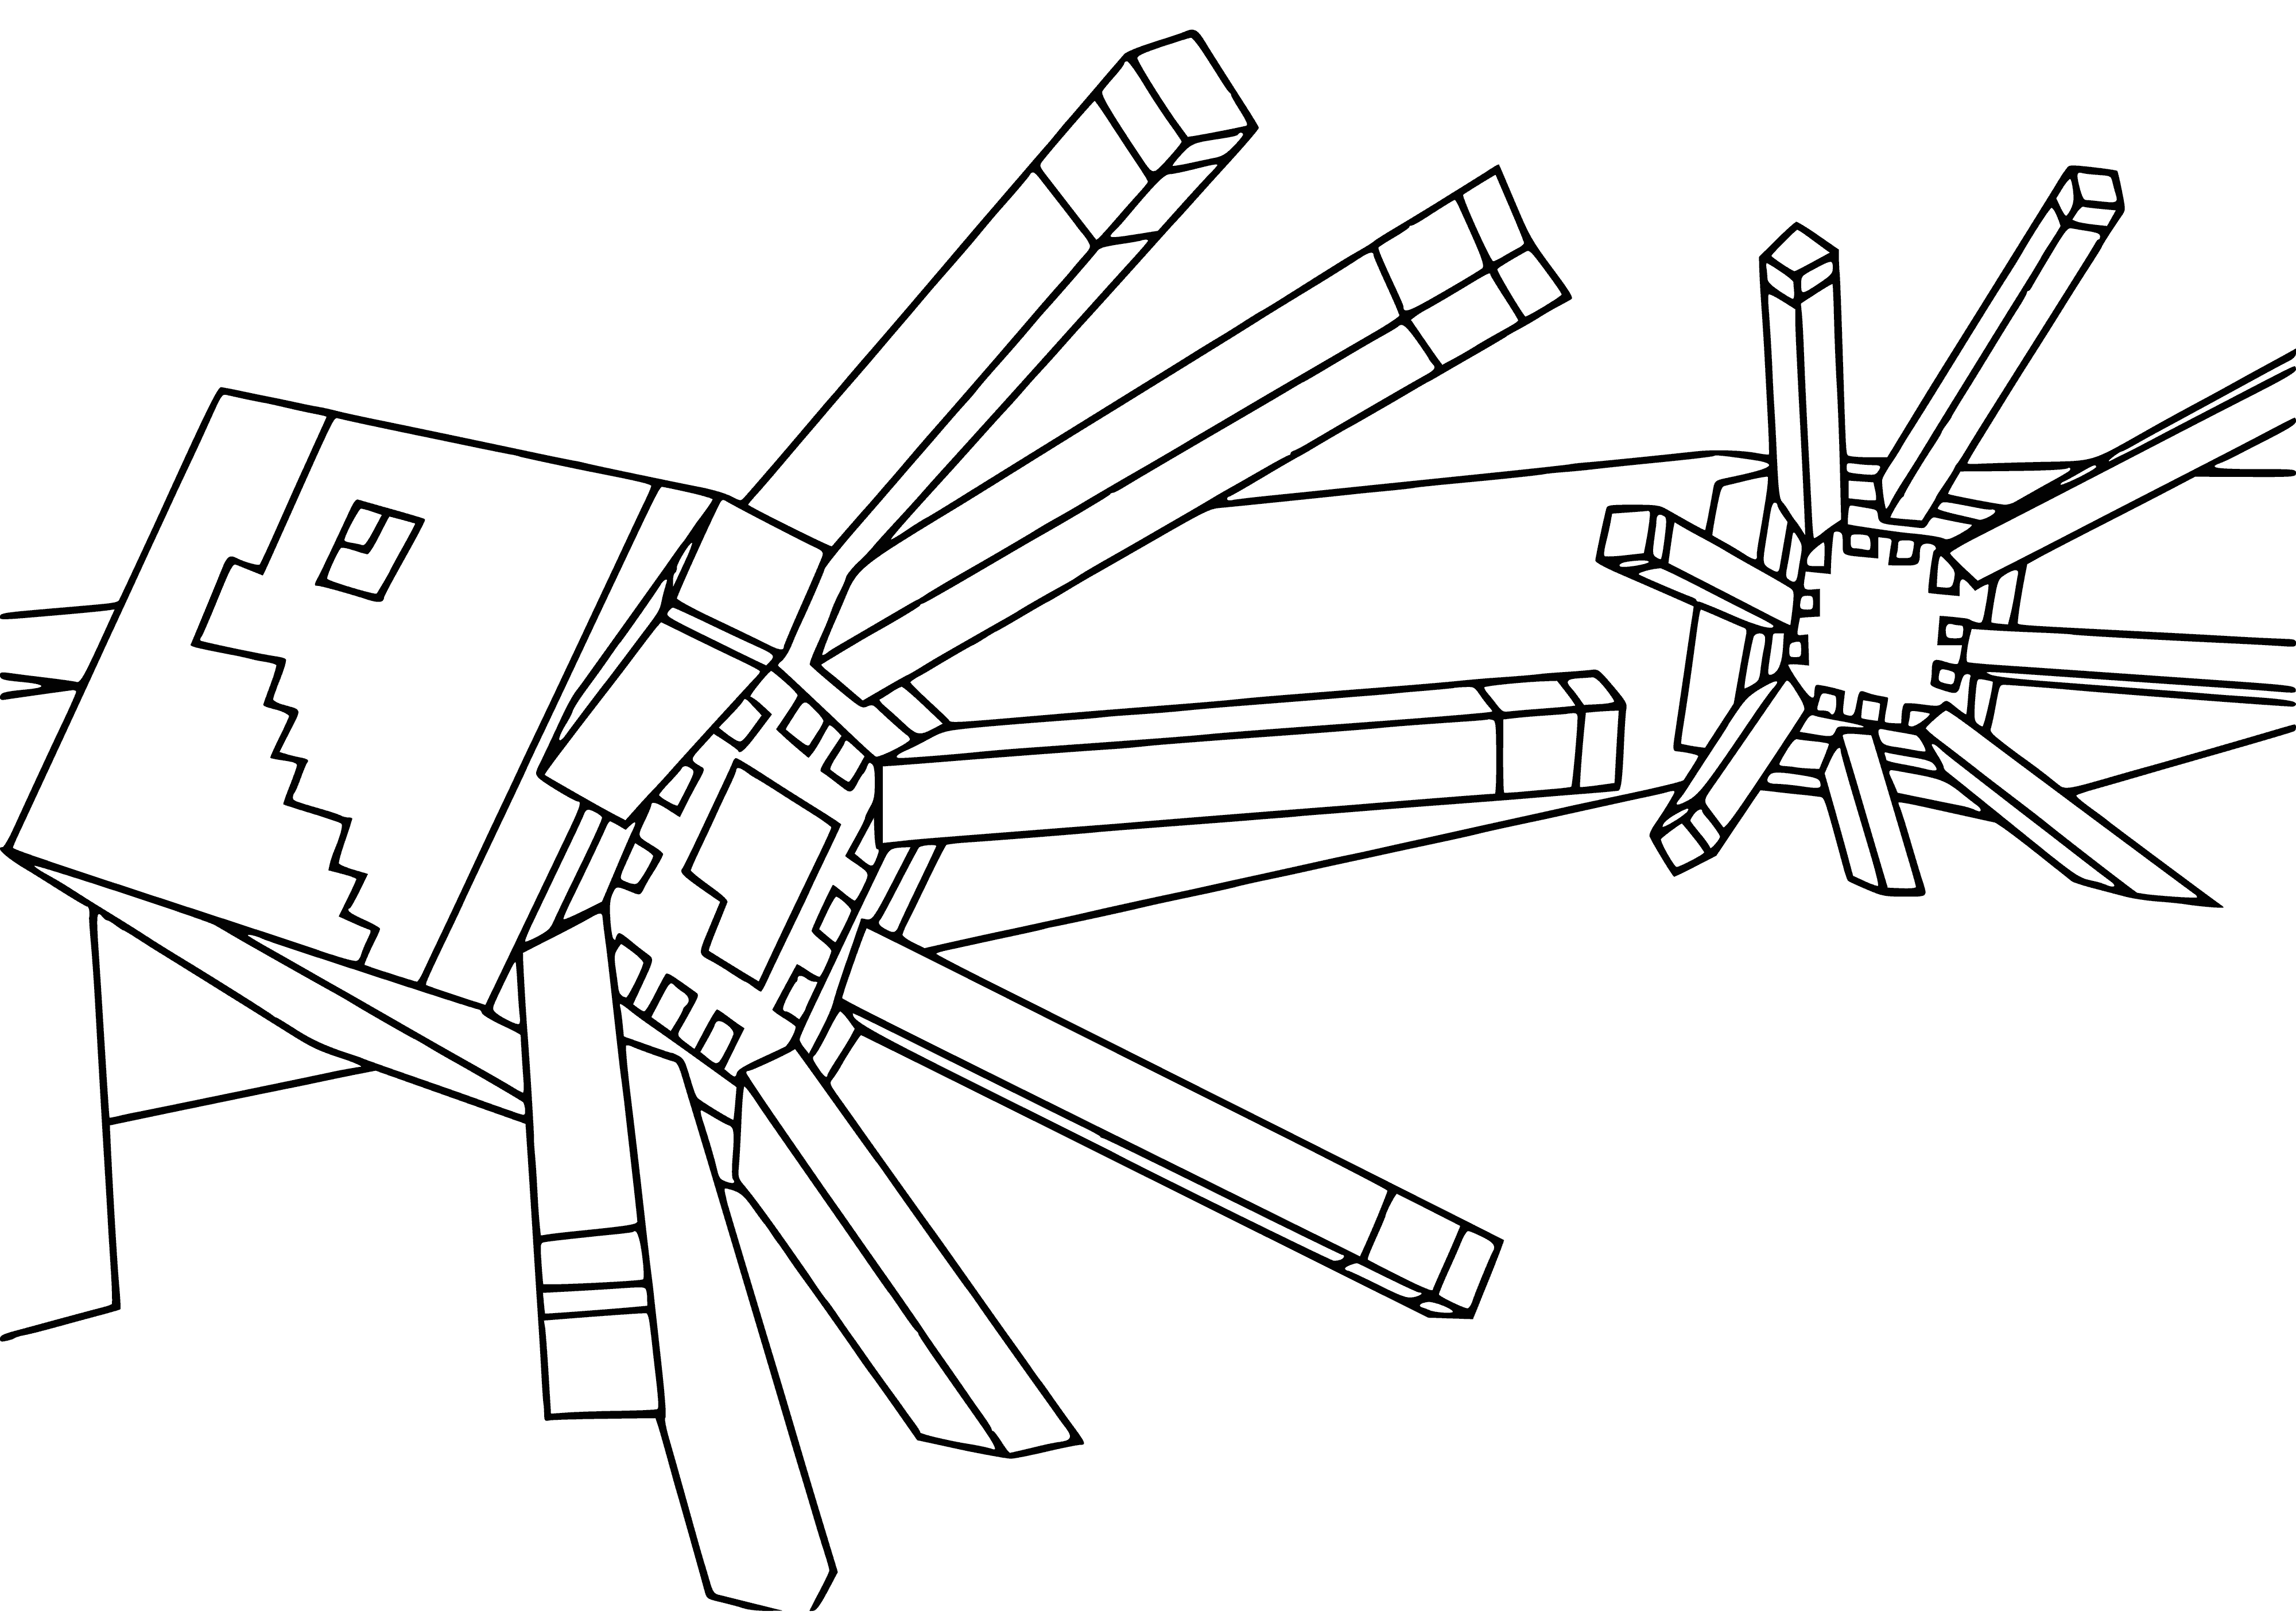 Octopus from Minecraft coloring page